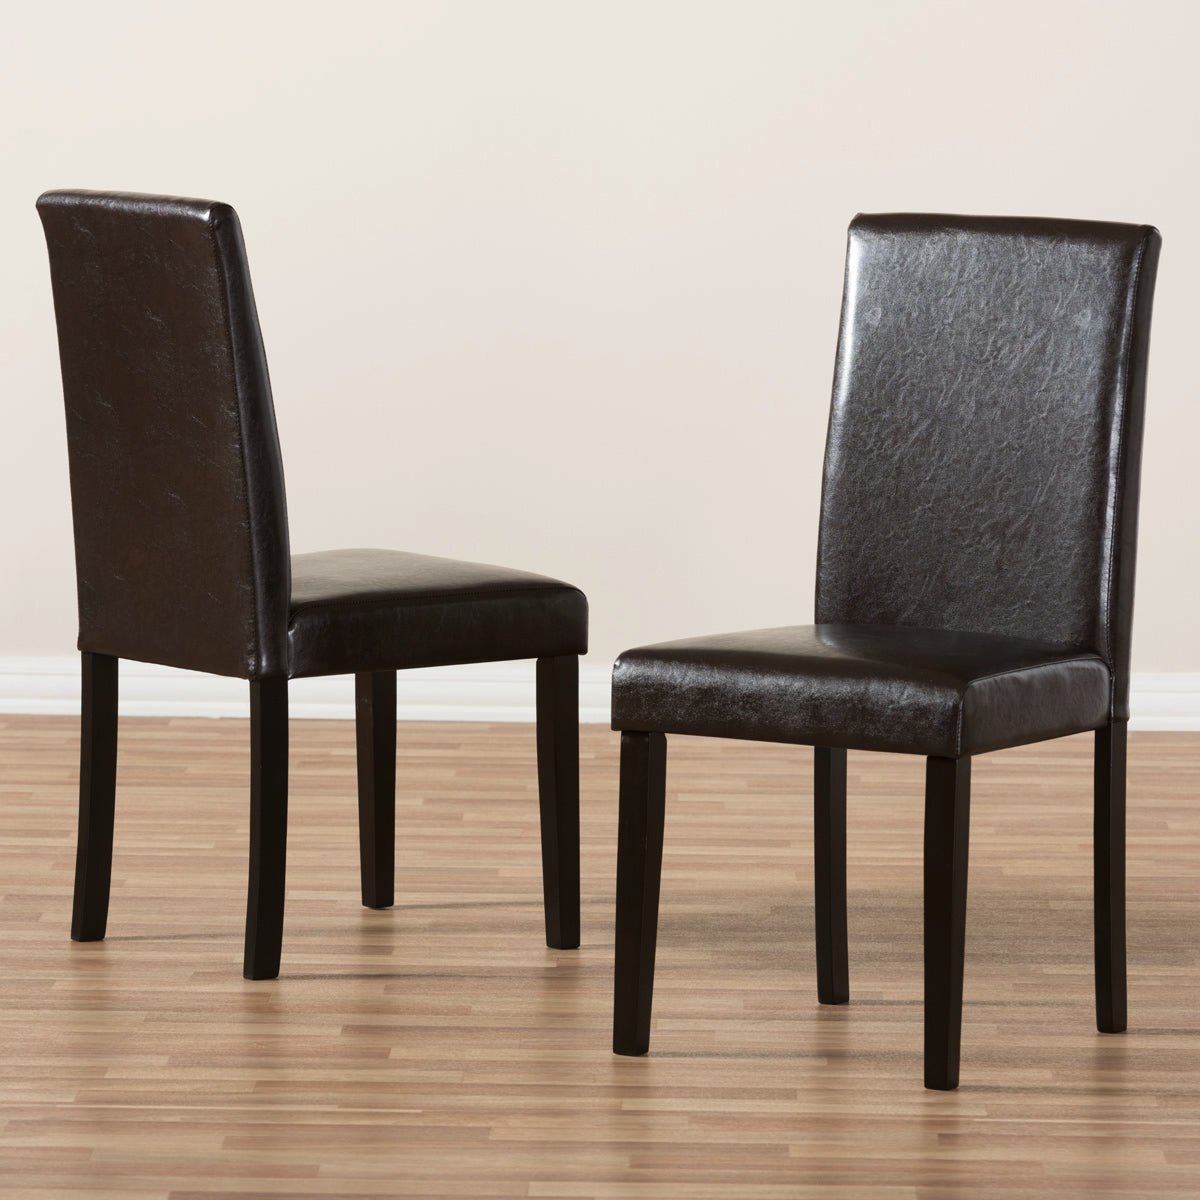 Baxton Studio Mia Modern and Contemporary Dark Brown Faux Leather Upholstered Dining Chair (Set of 2) Baxton Studio-dining chair-Minimal And Modern - 5